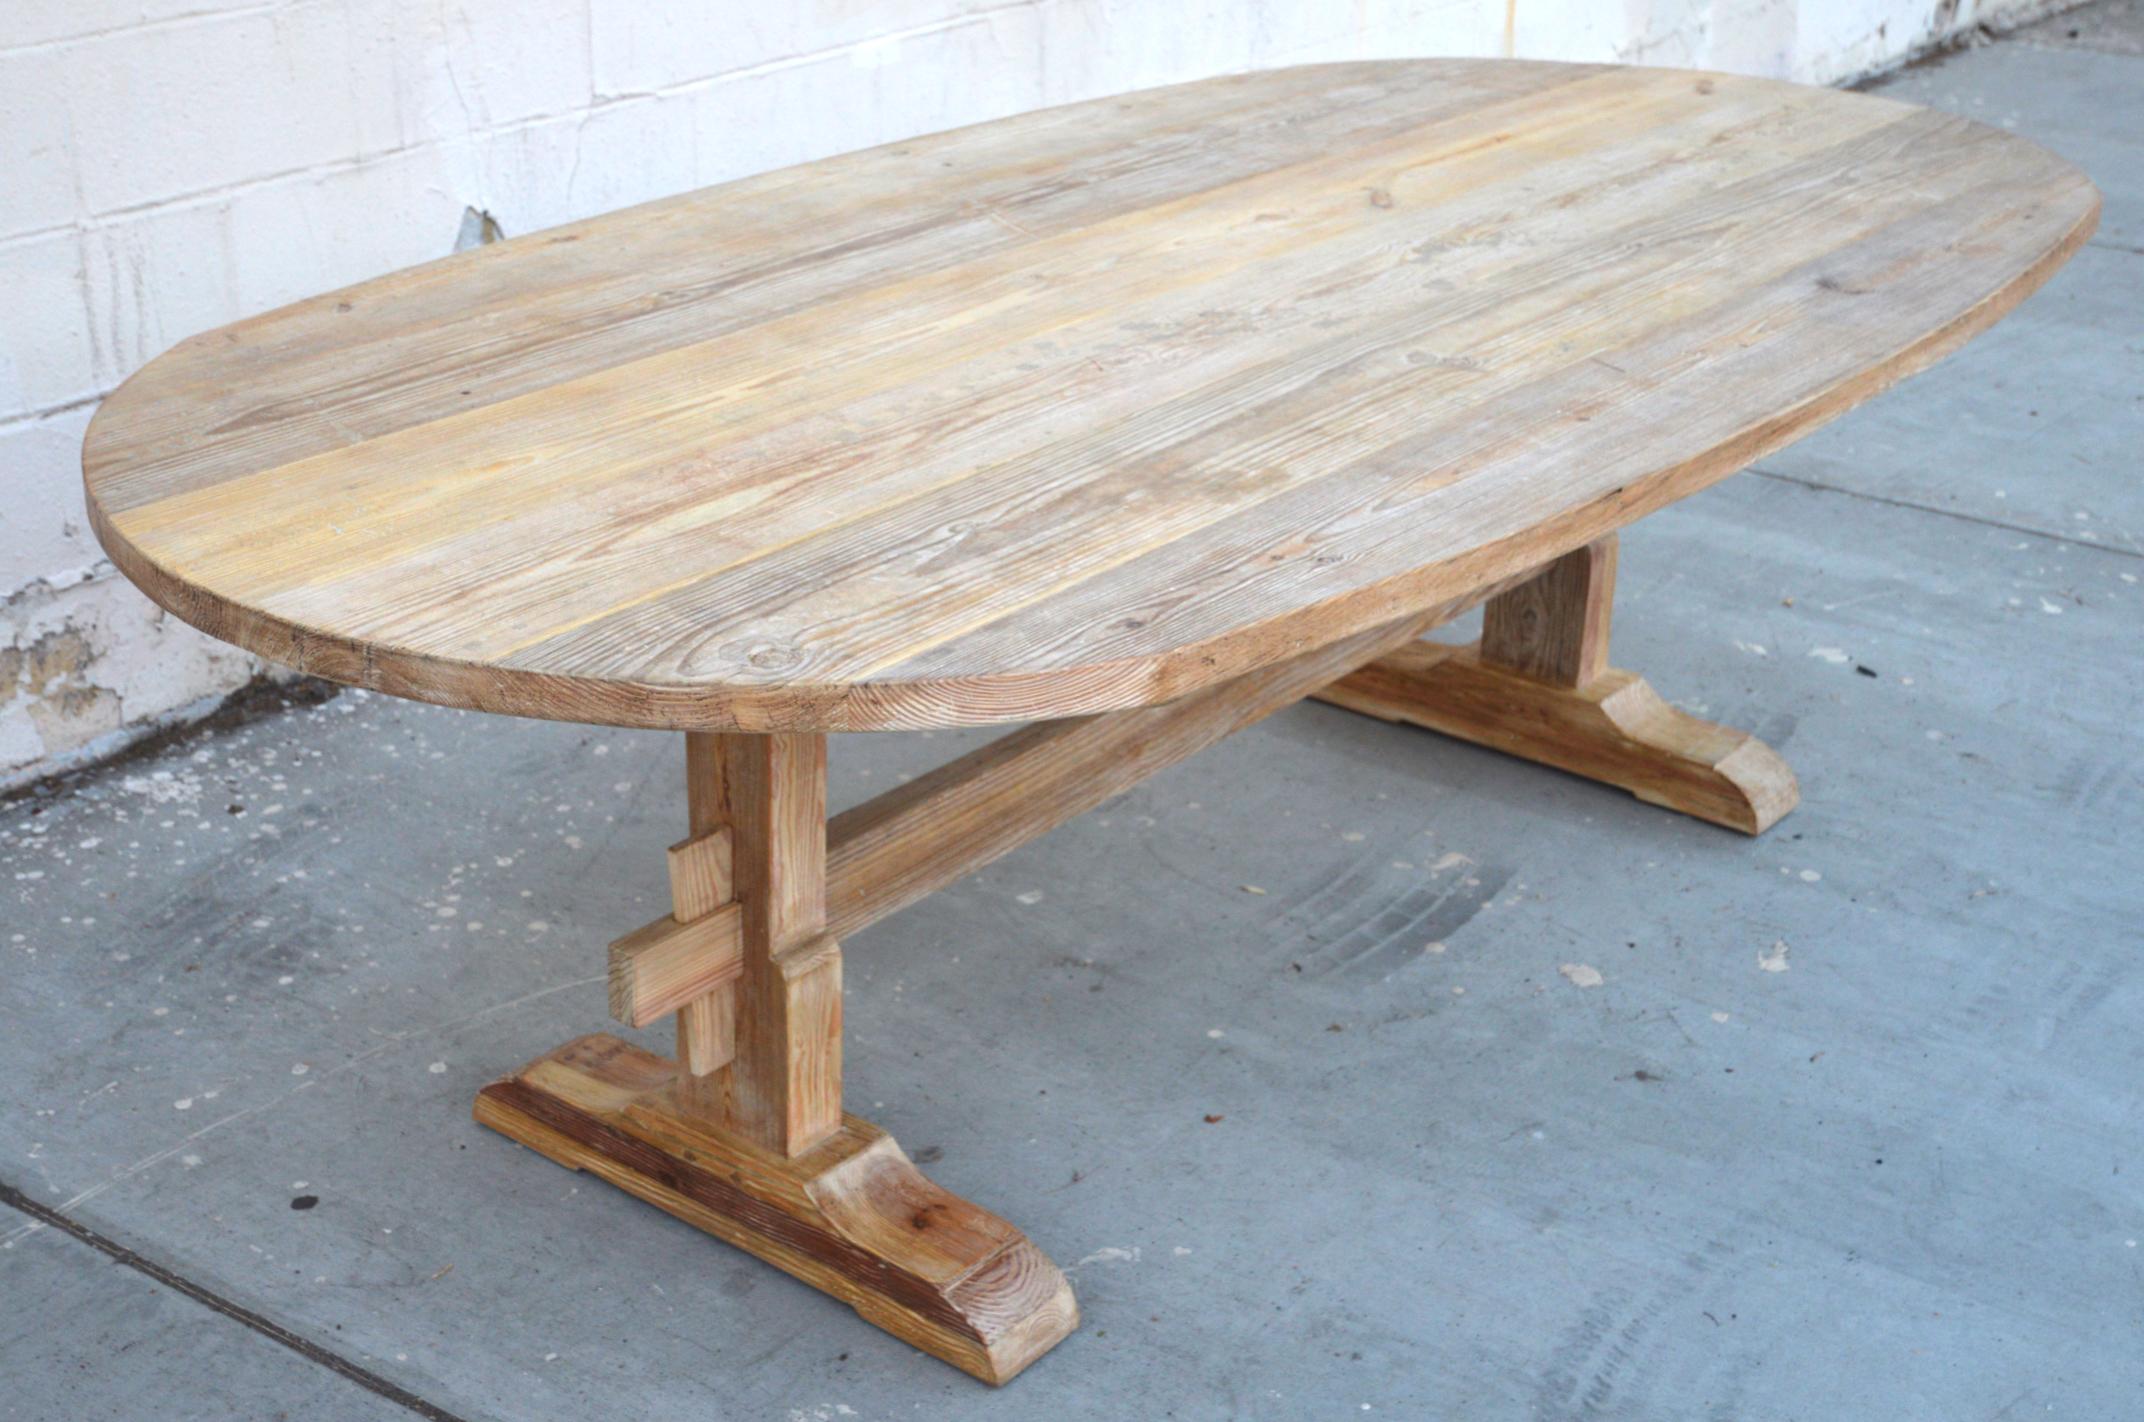 This reclaimed pine farm table is seen here in 96